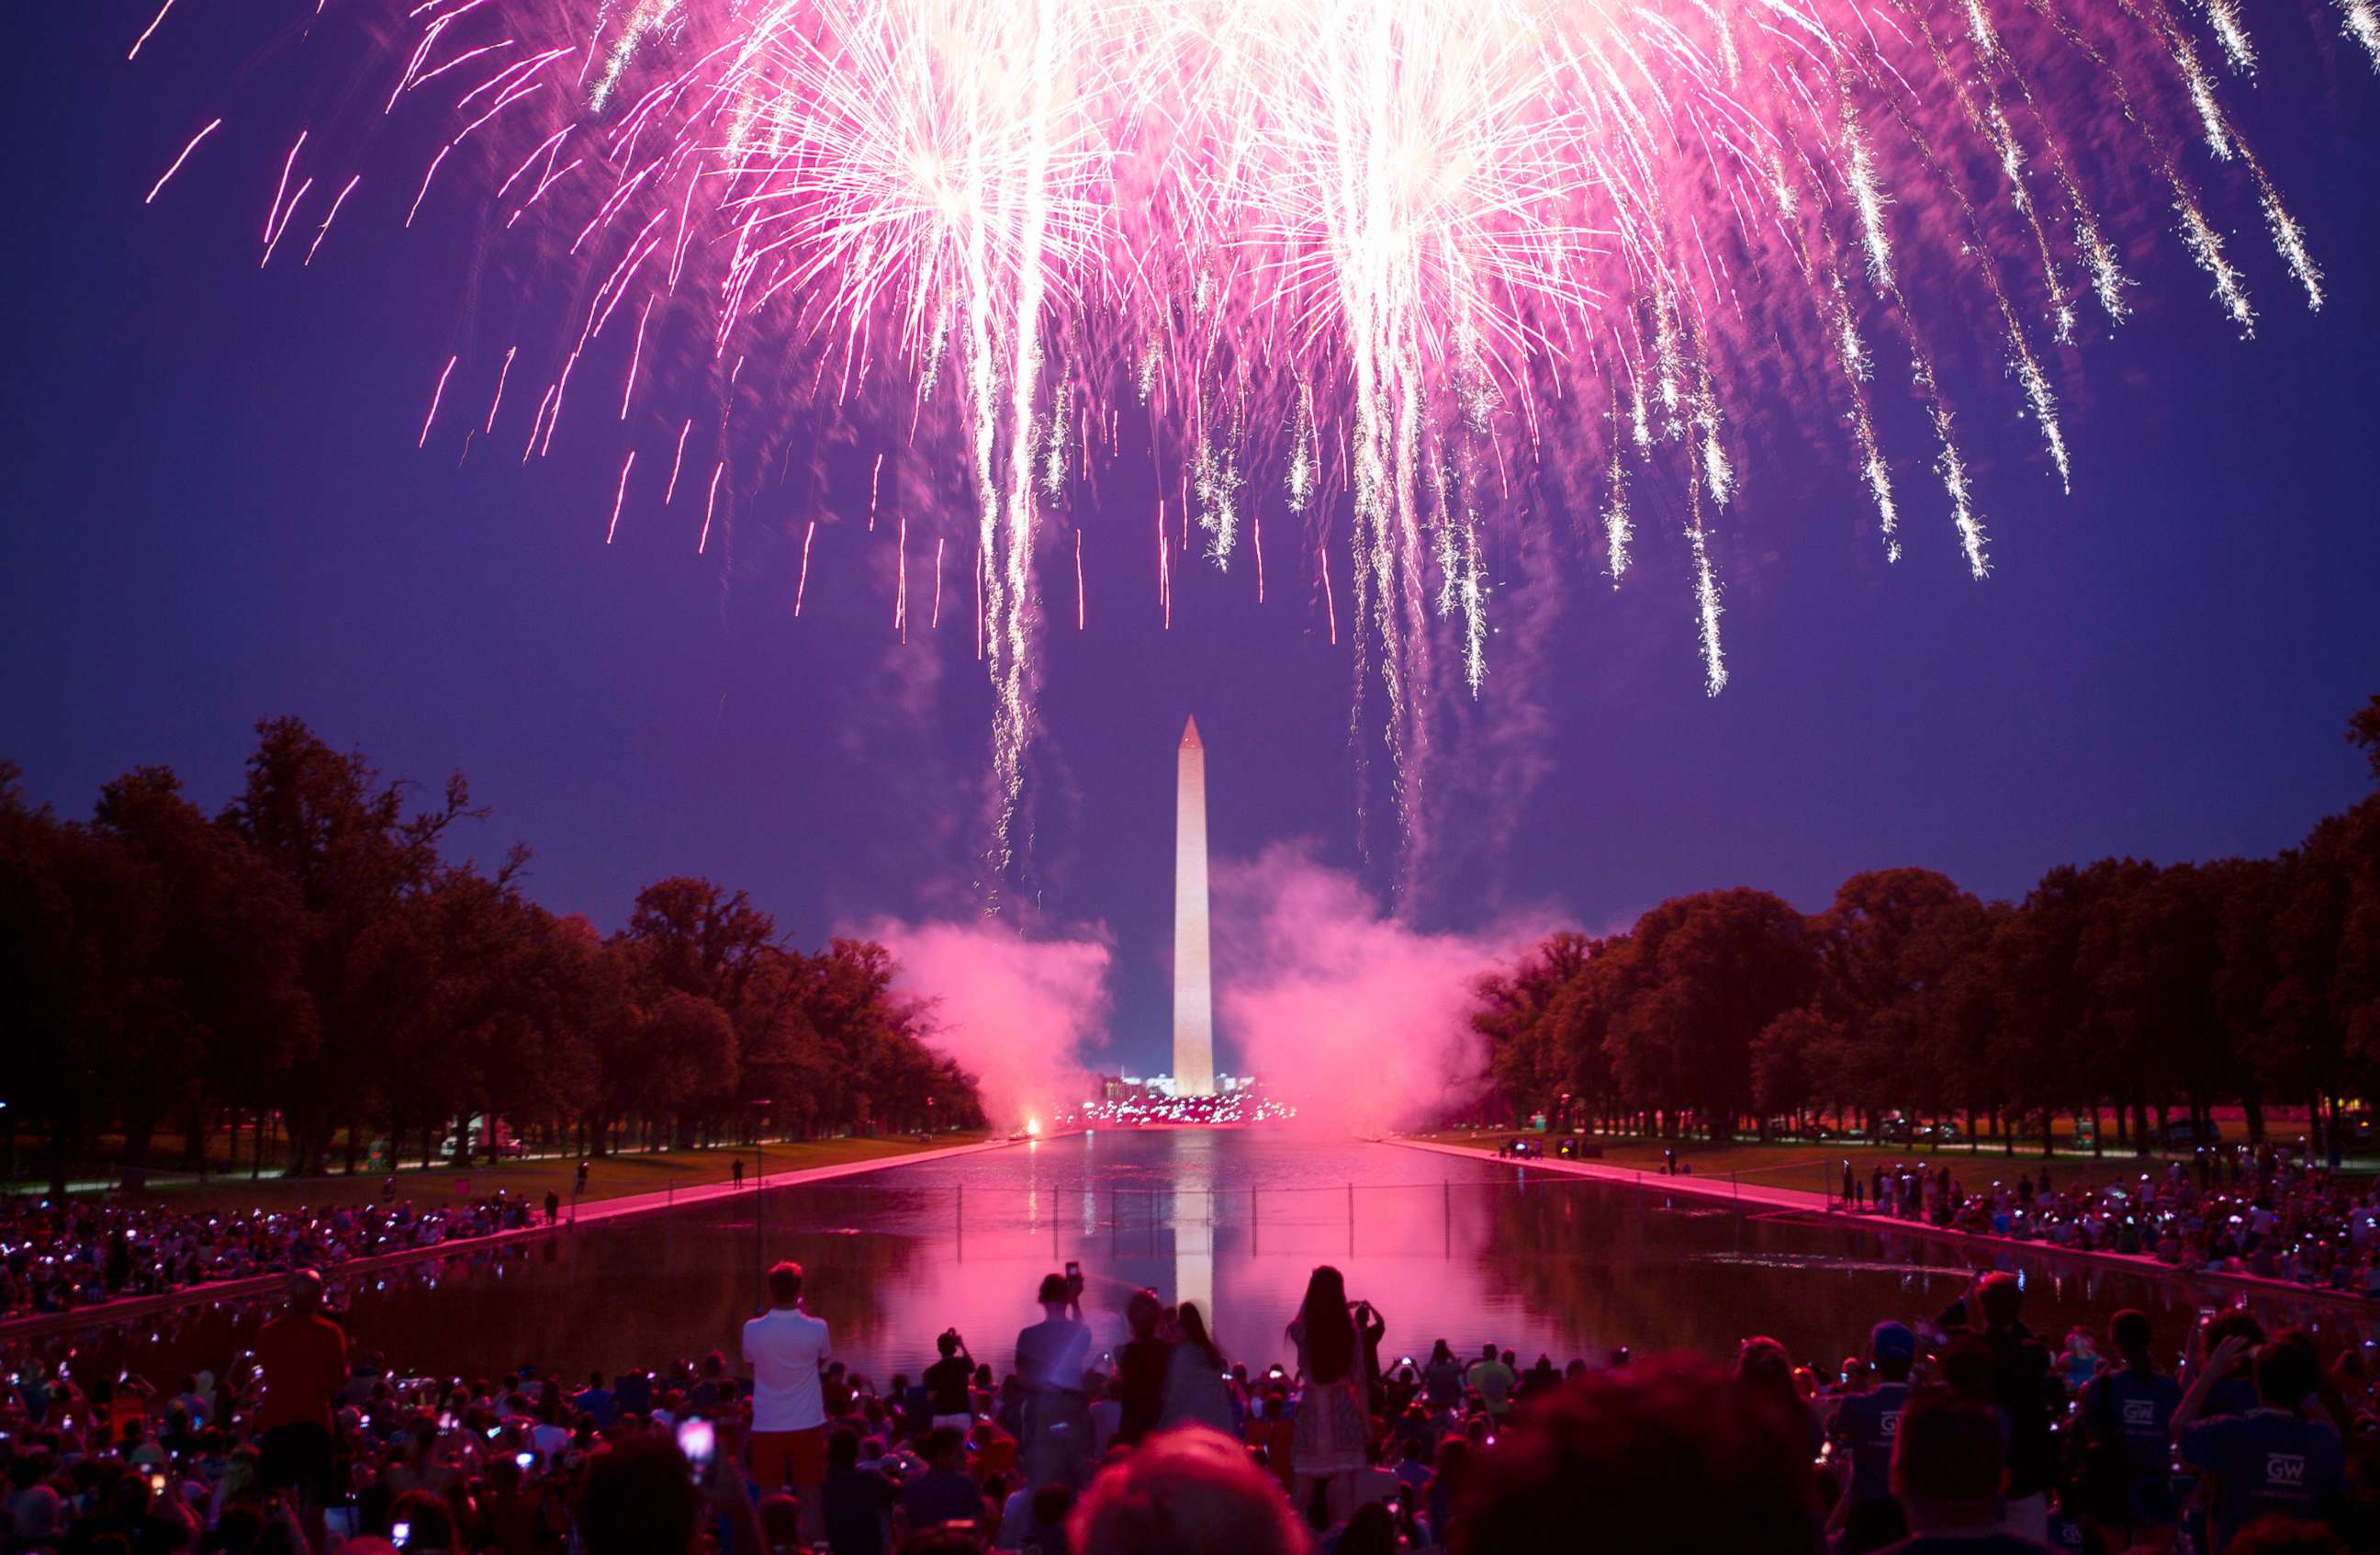 PHOTO: Fireworks illuminate the National Mall in celebration of Independence Day in Washington, D.C. on July 4, 2018.